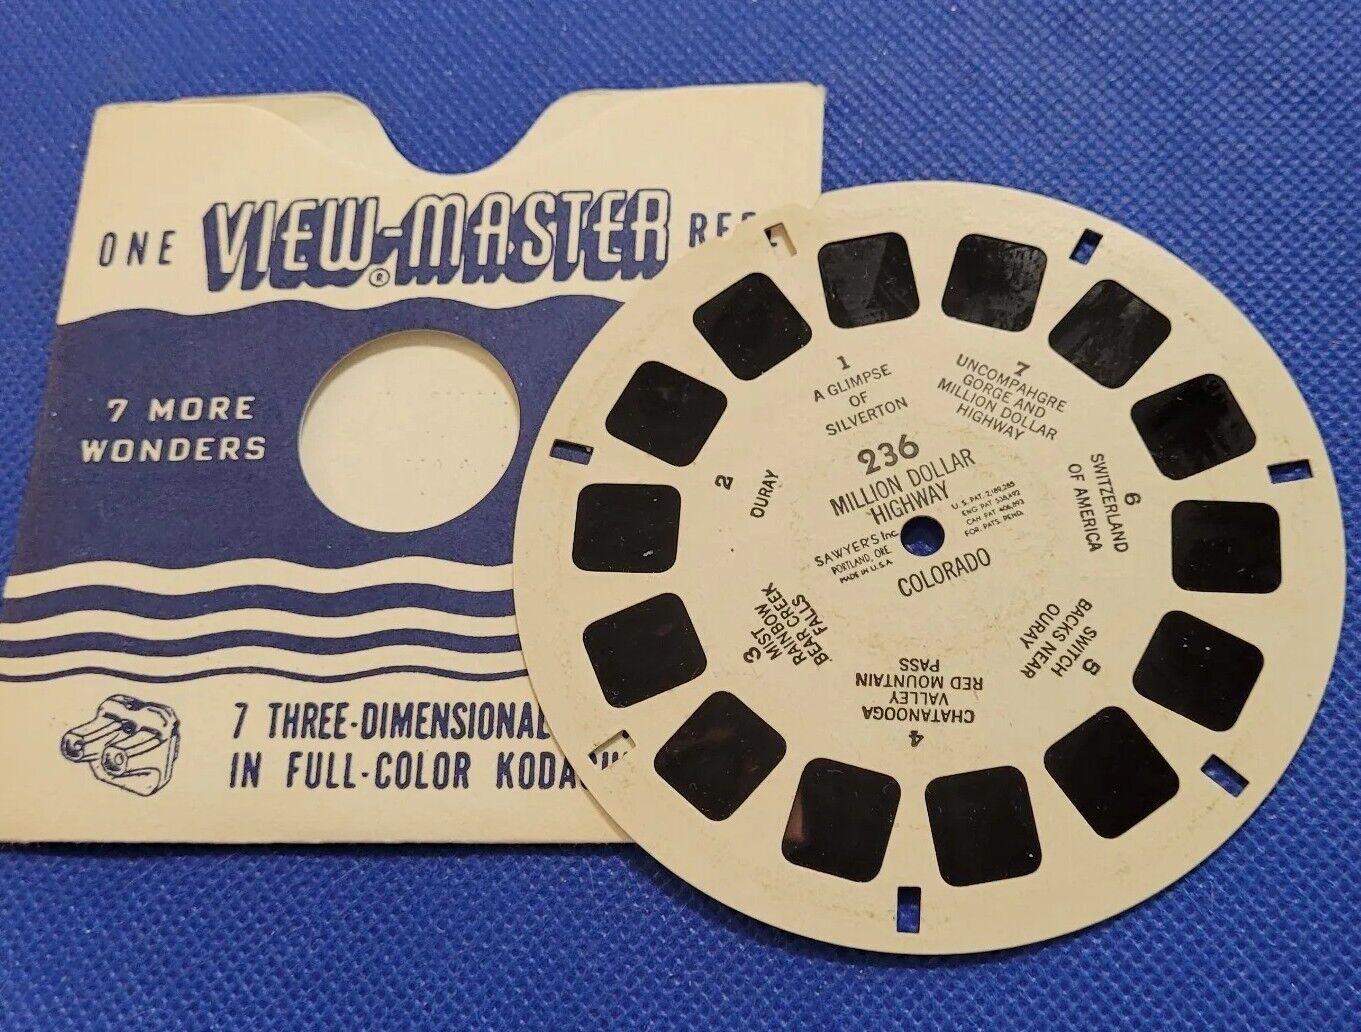 Sawyer\'s Single view-master Reel 236 The Million Dollar Highway Colorado no date